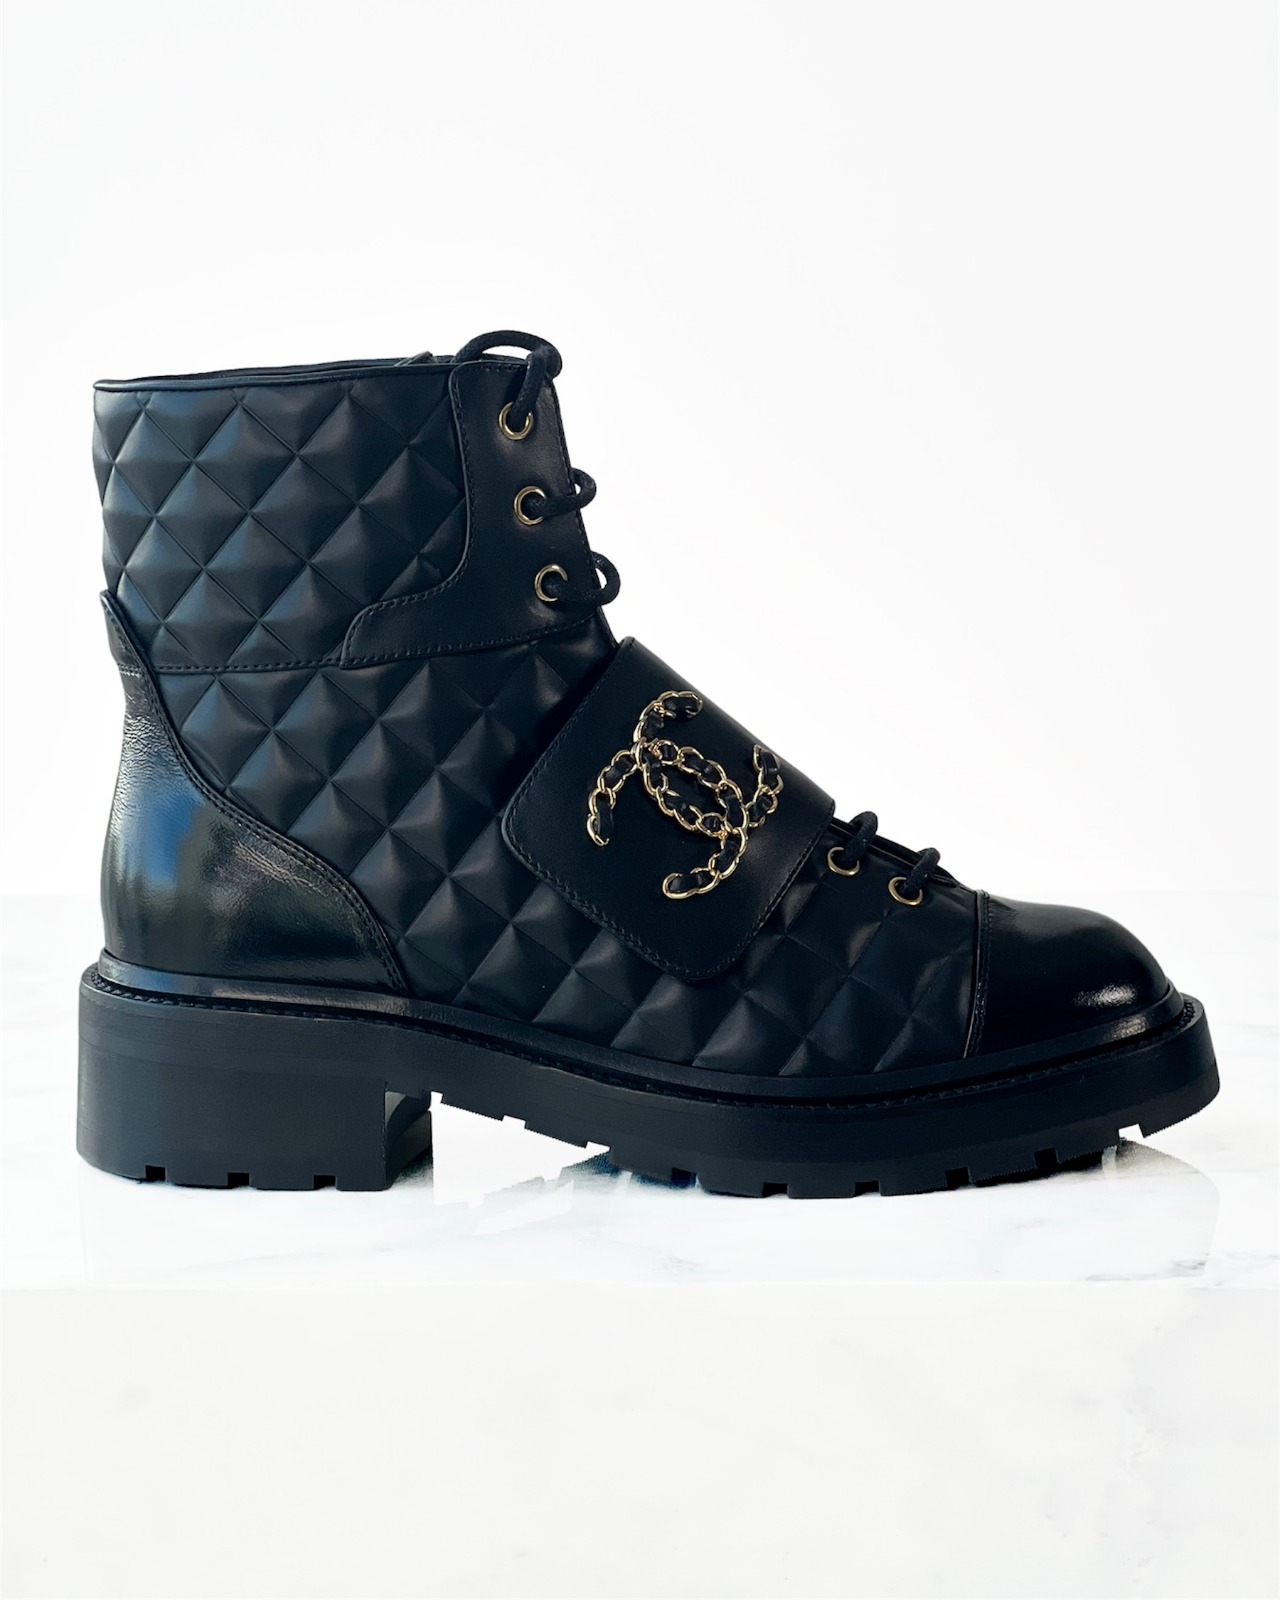 Chanel Black Calfskin Lace-Up Boots – MILNY PARLON